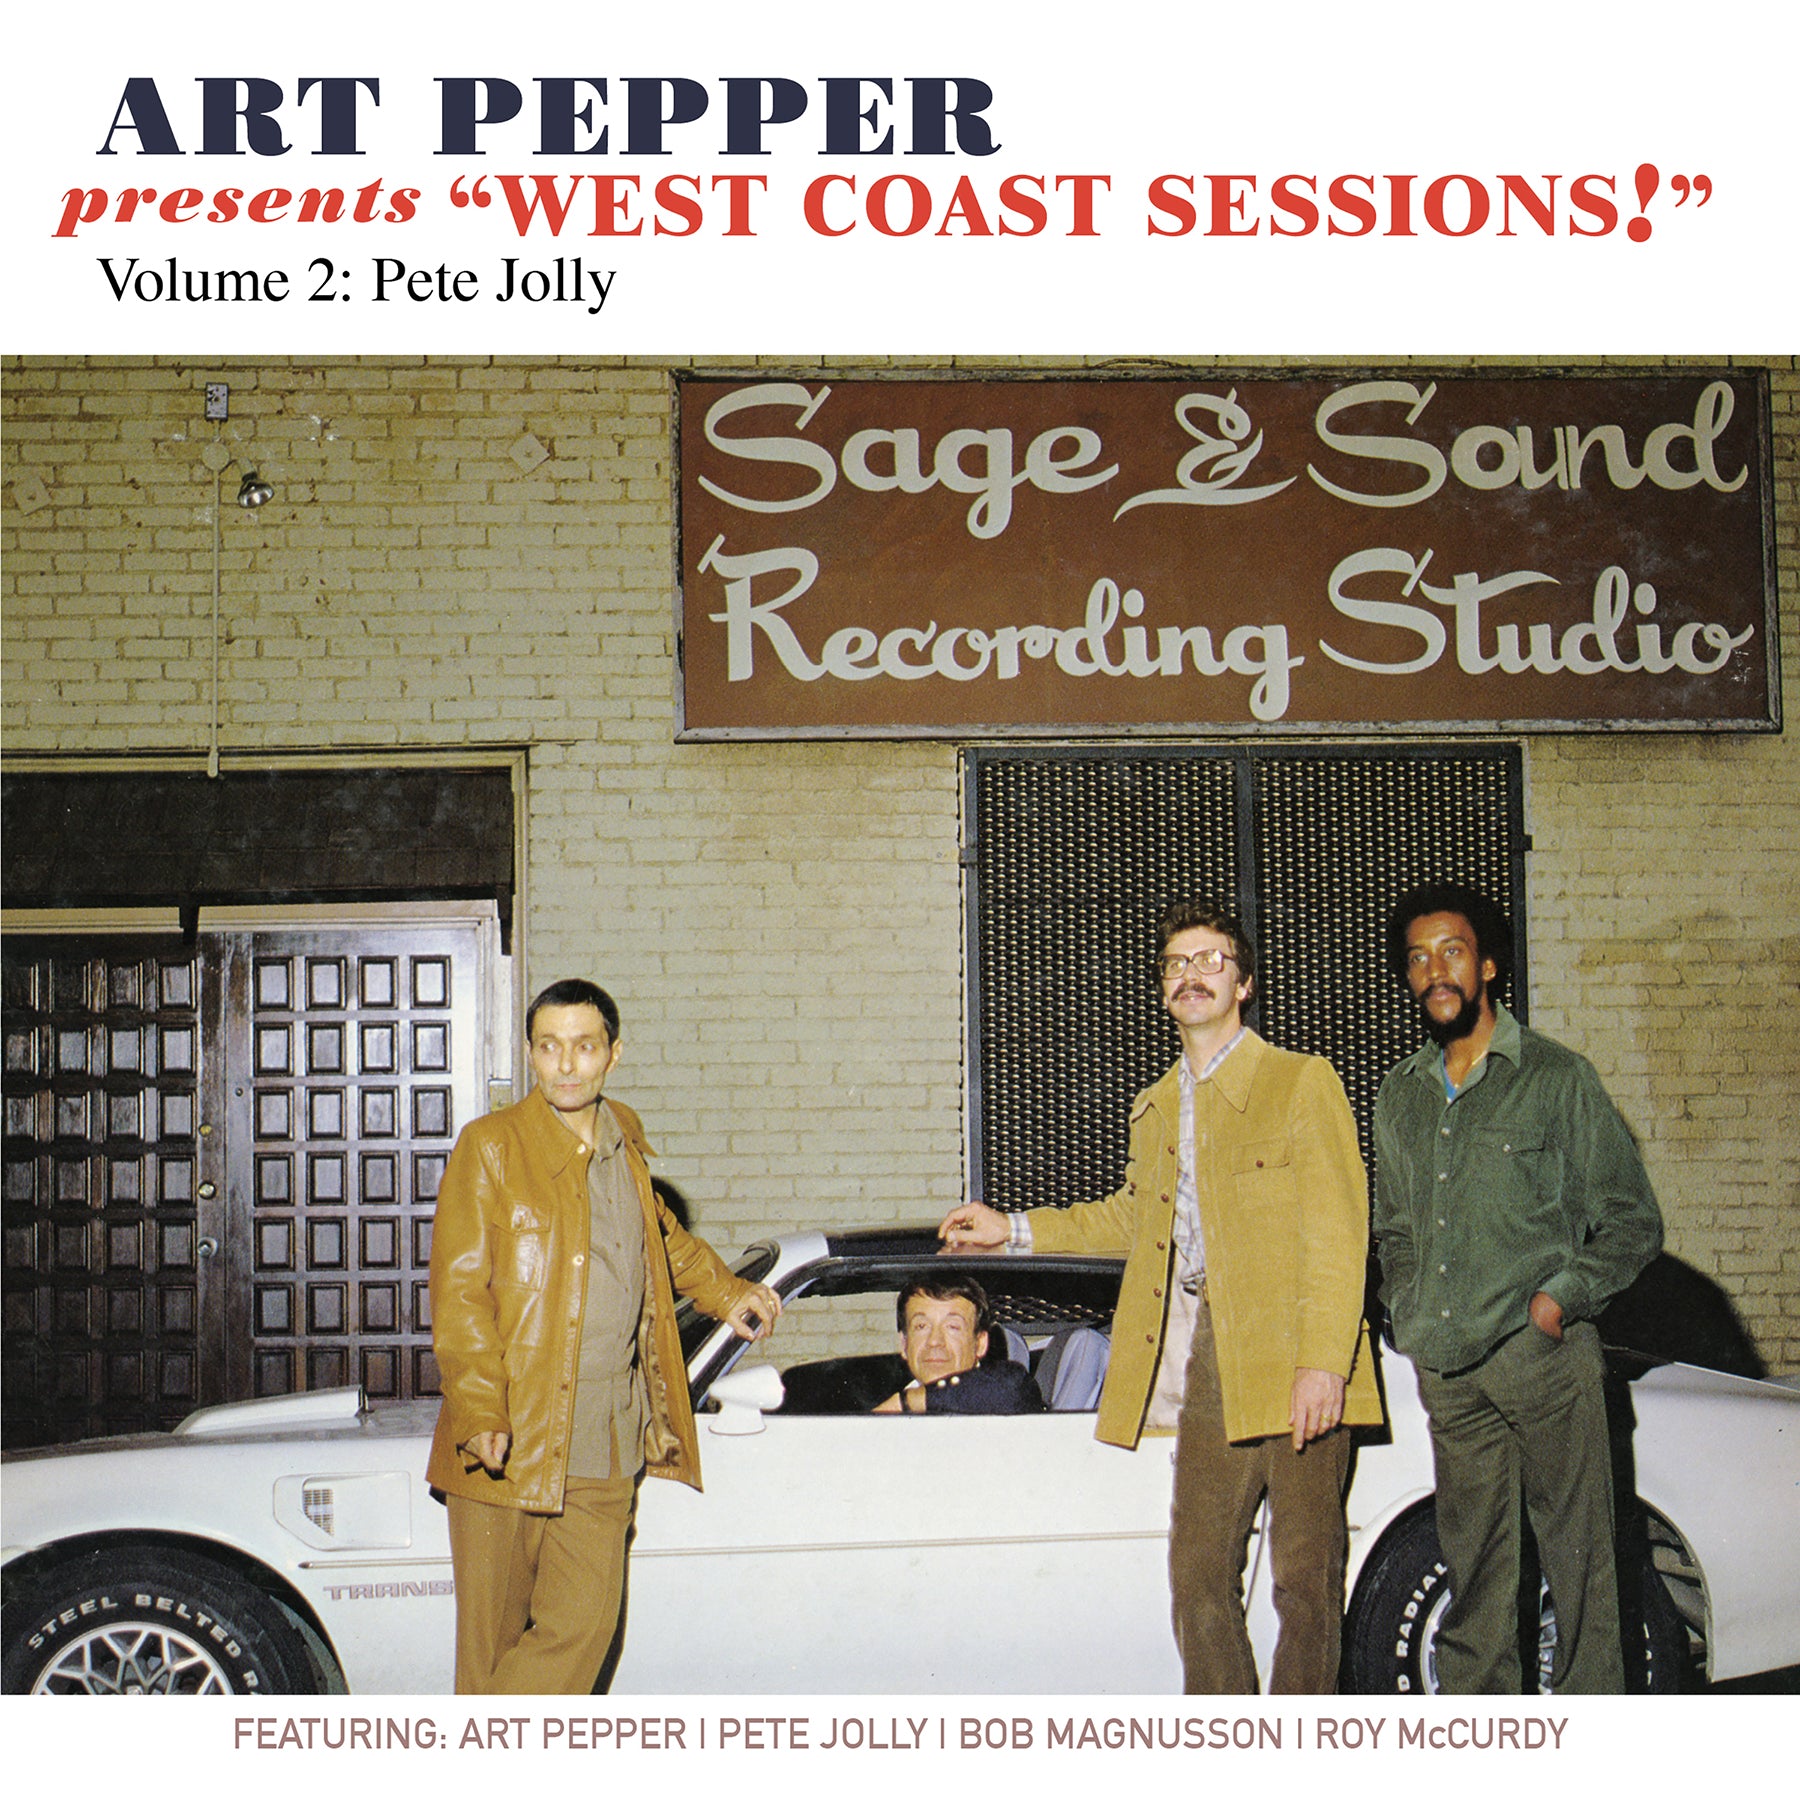 Art Pepper Presents “West Coast Sessions!” Volume 2: Pete Jolly